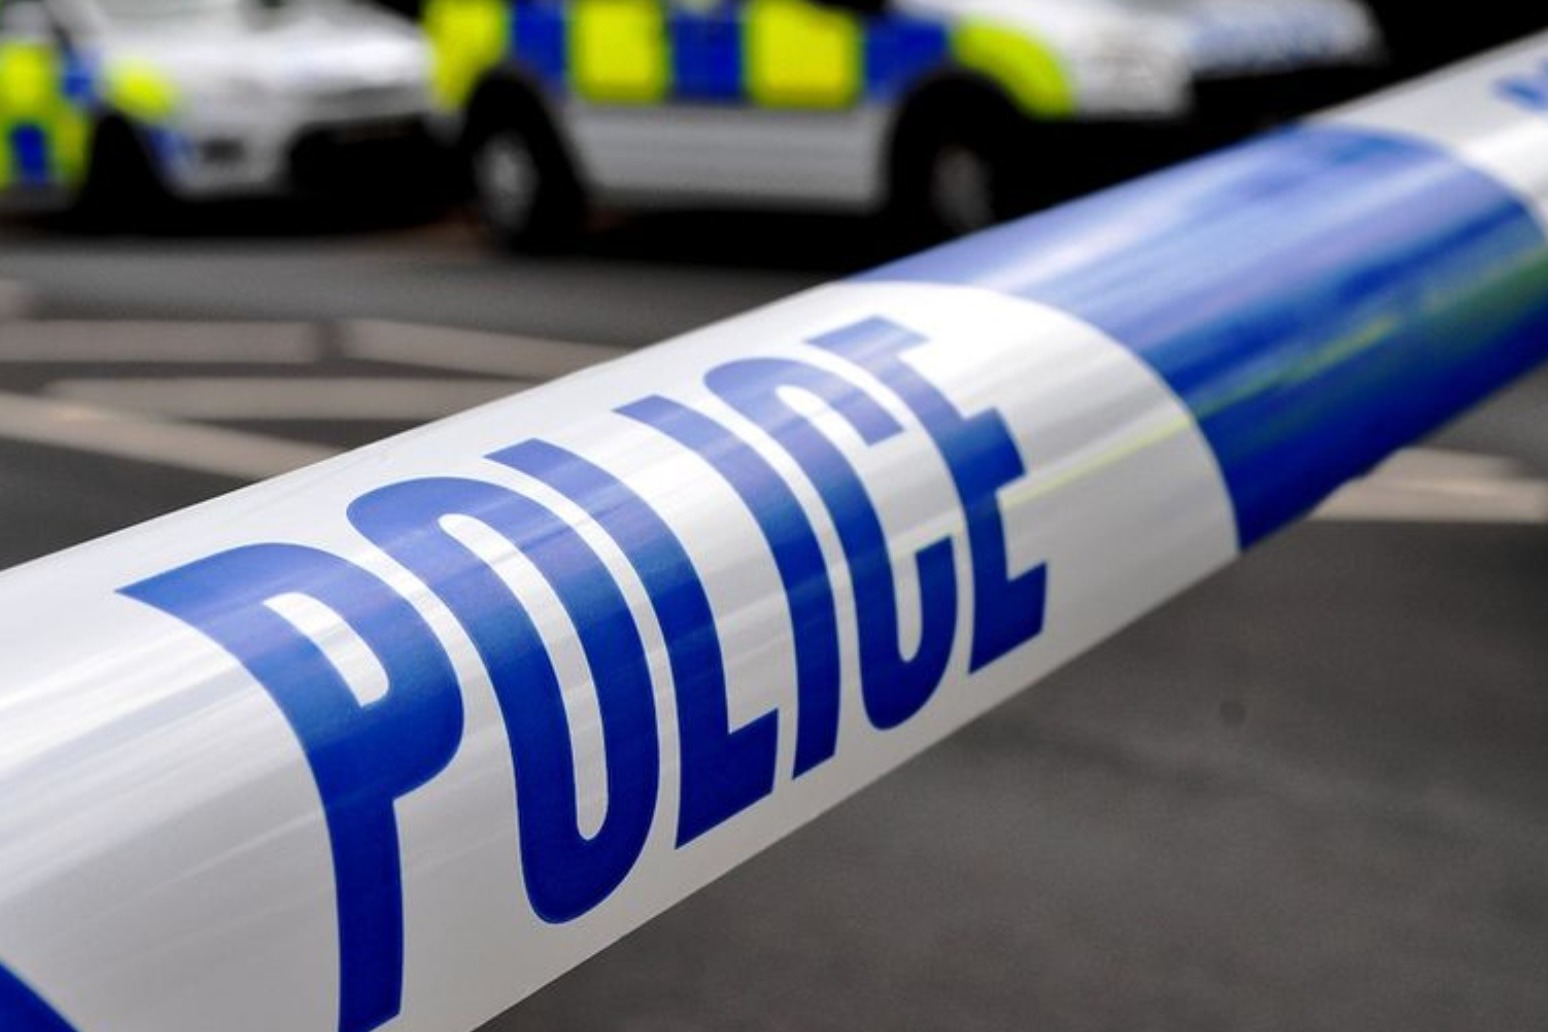 South Wales Police responding to ‘serious’ incident 